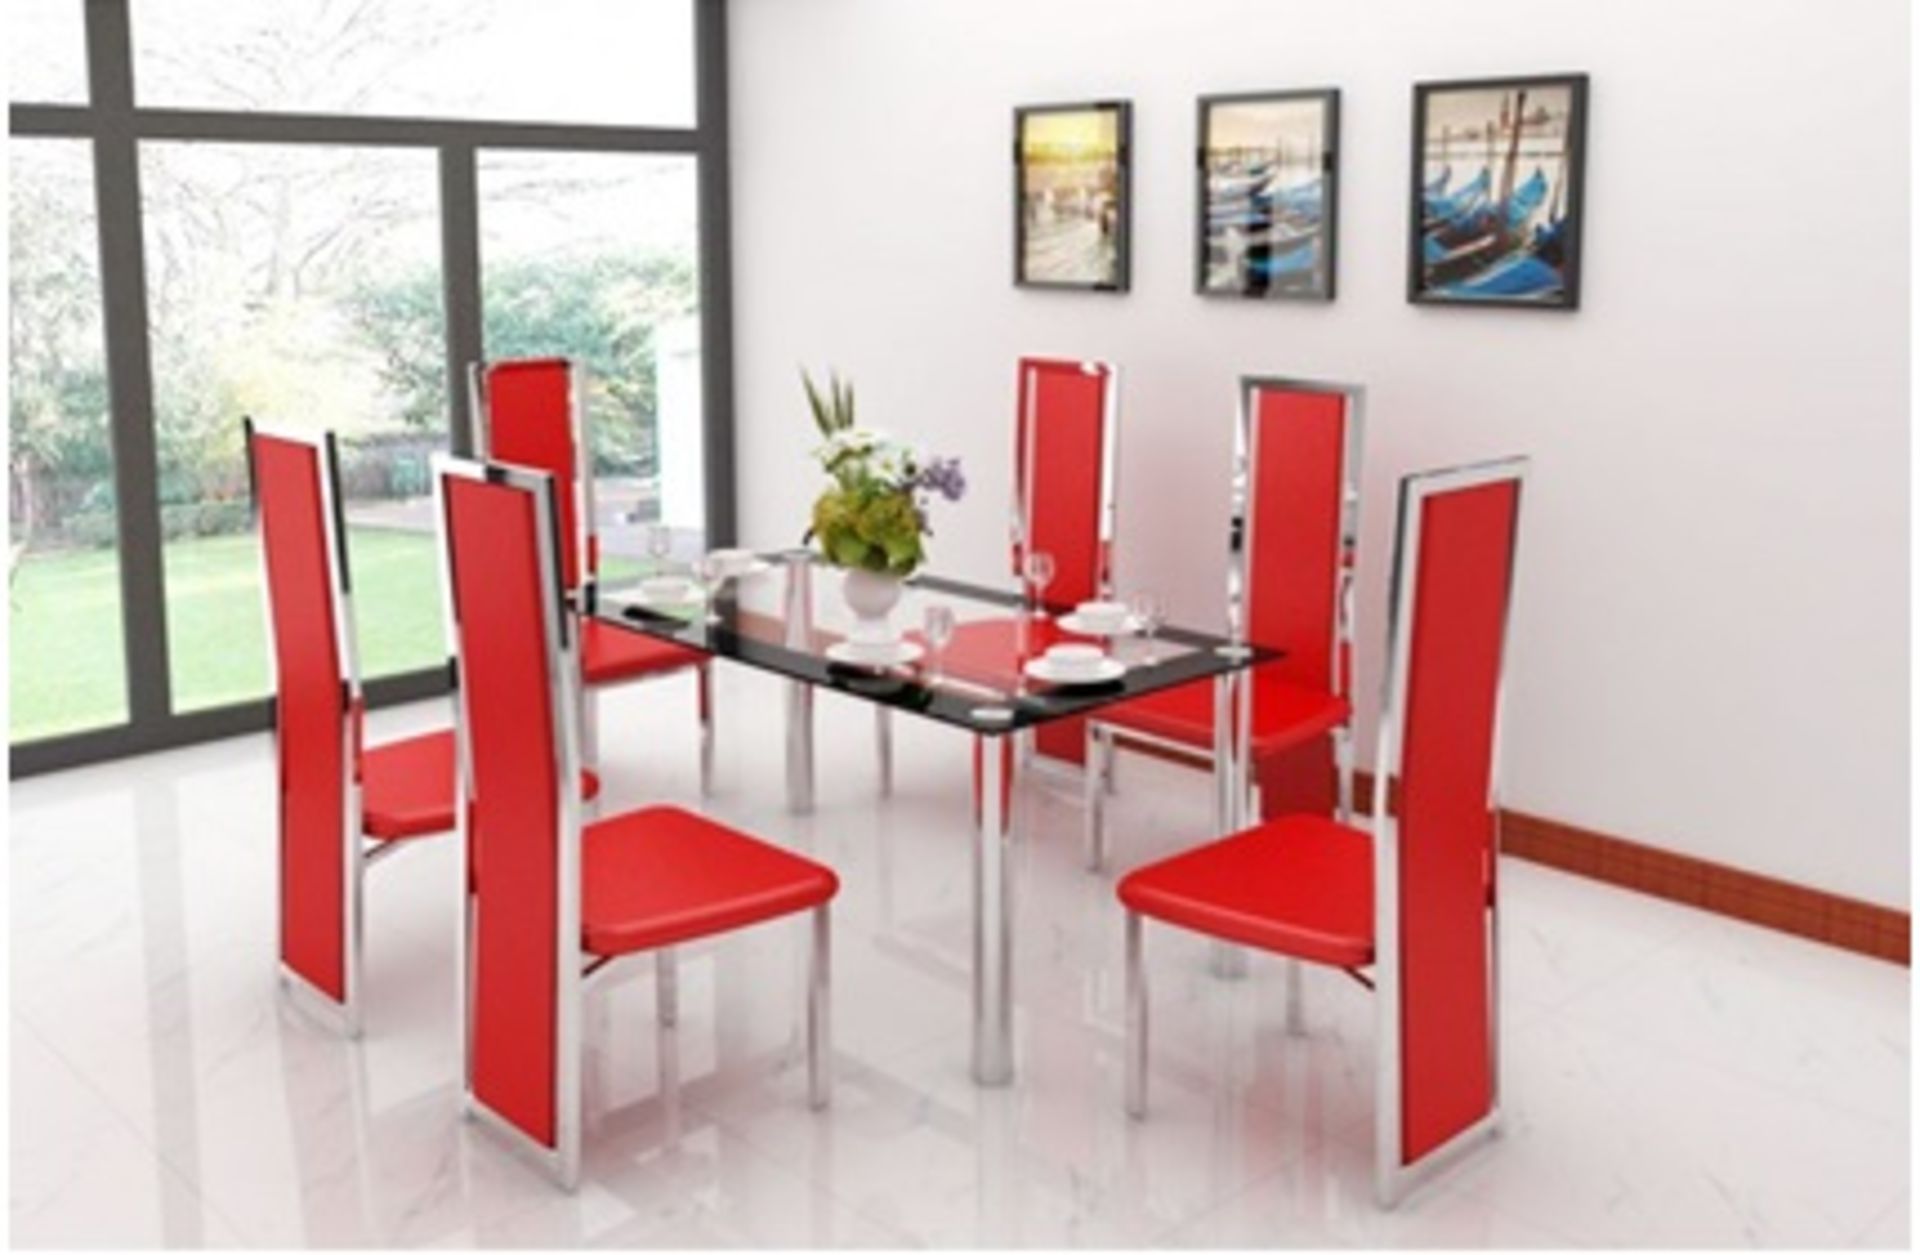 1 x Chrome and Glass 6 Seater Dining Table and 6 Red Chairs - DTBL014 (Brand New & Boxed)